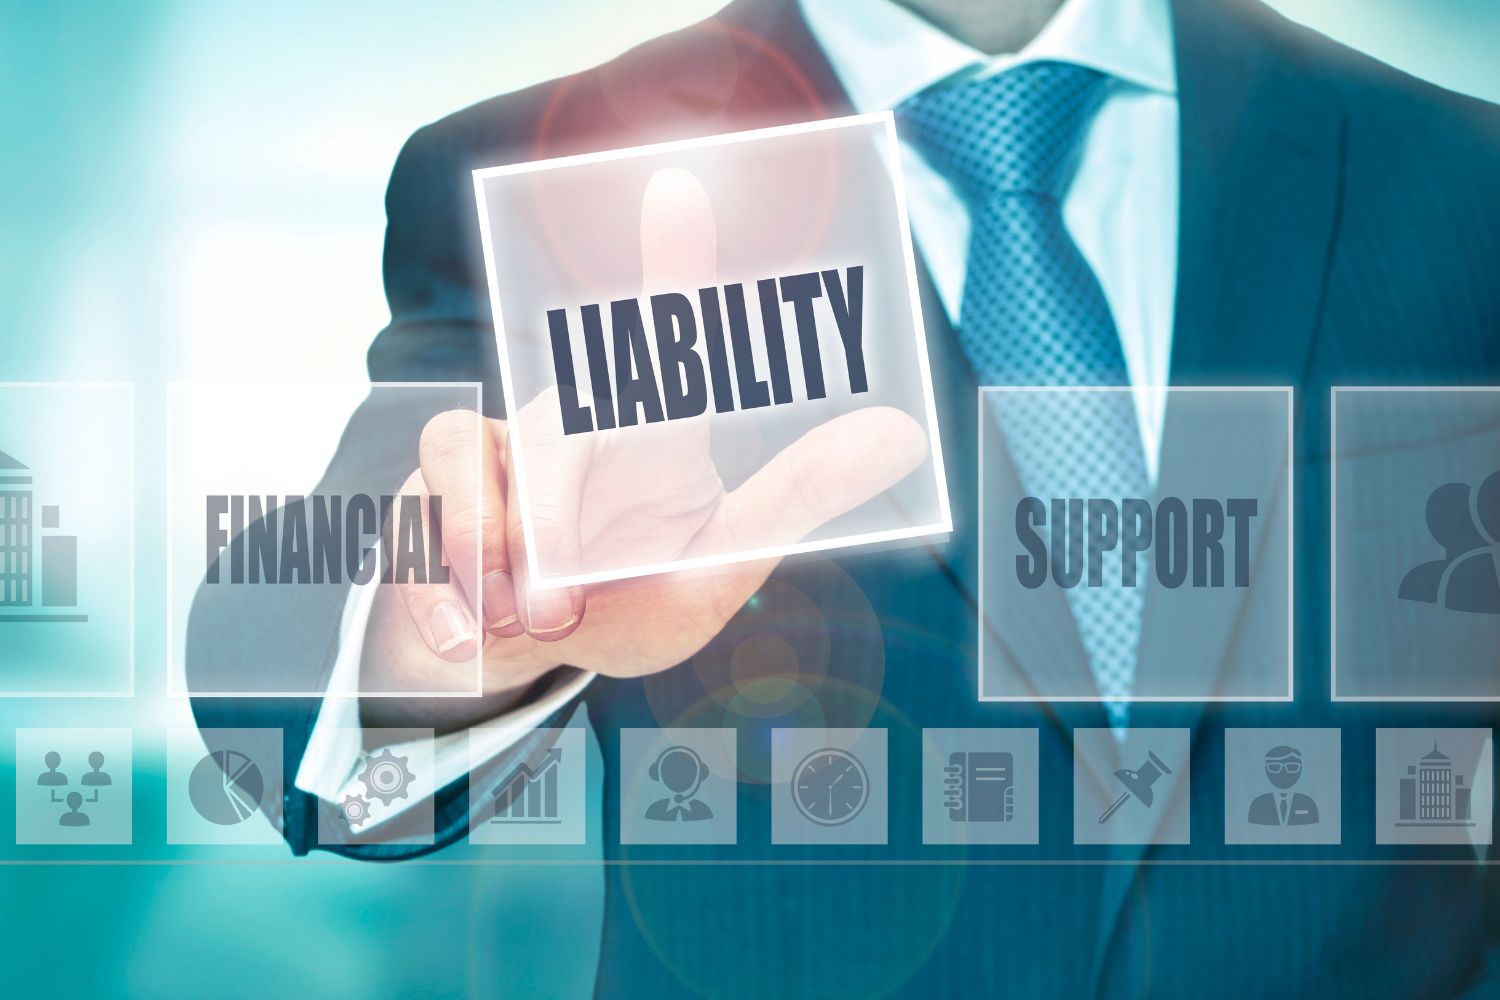 Why does your business need general liability insurance coverage?